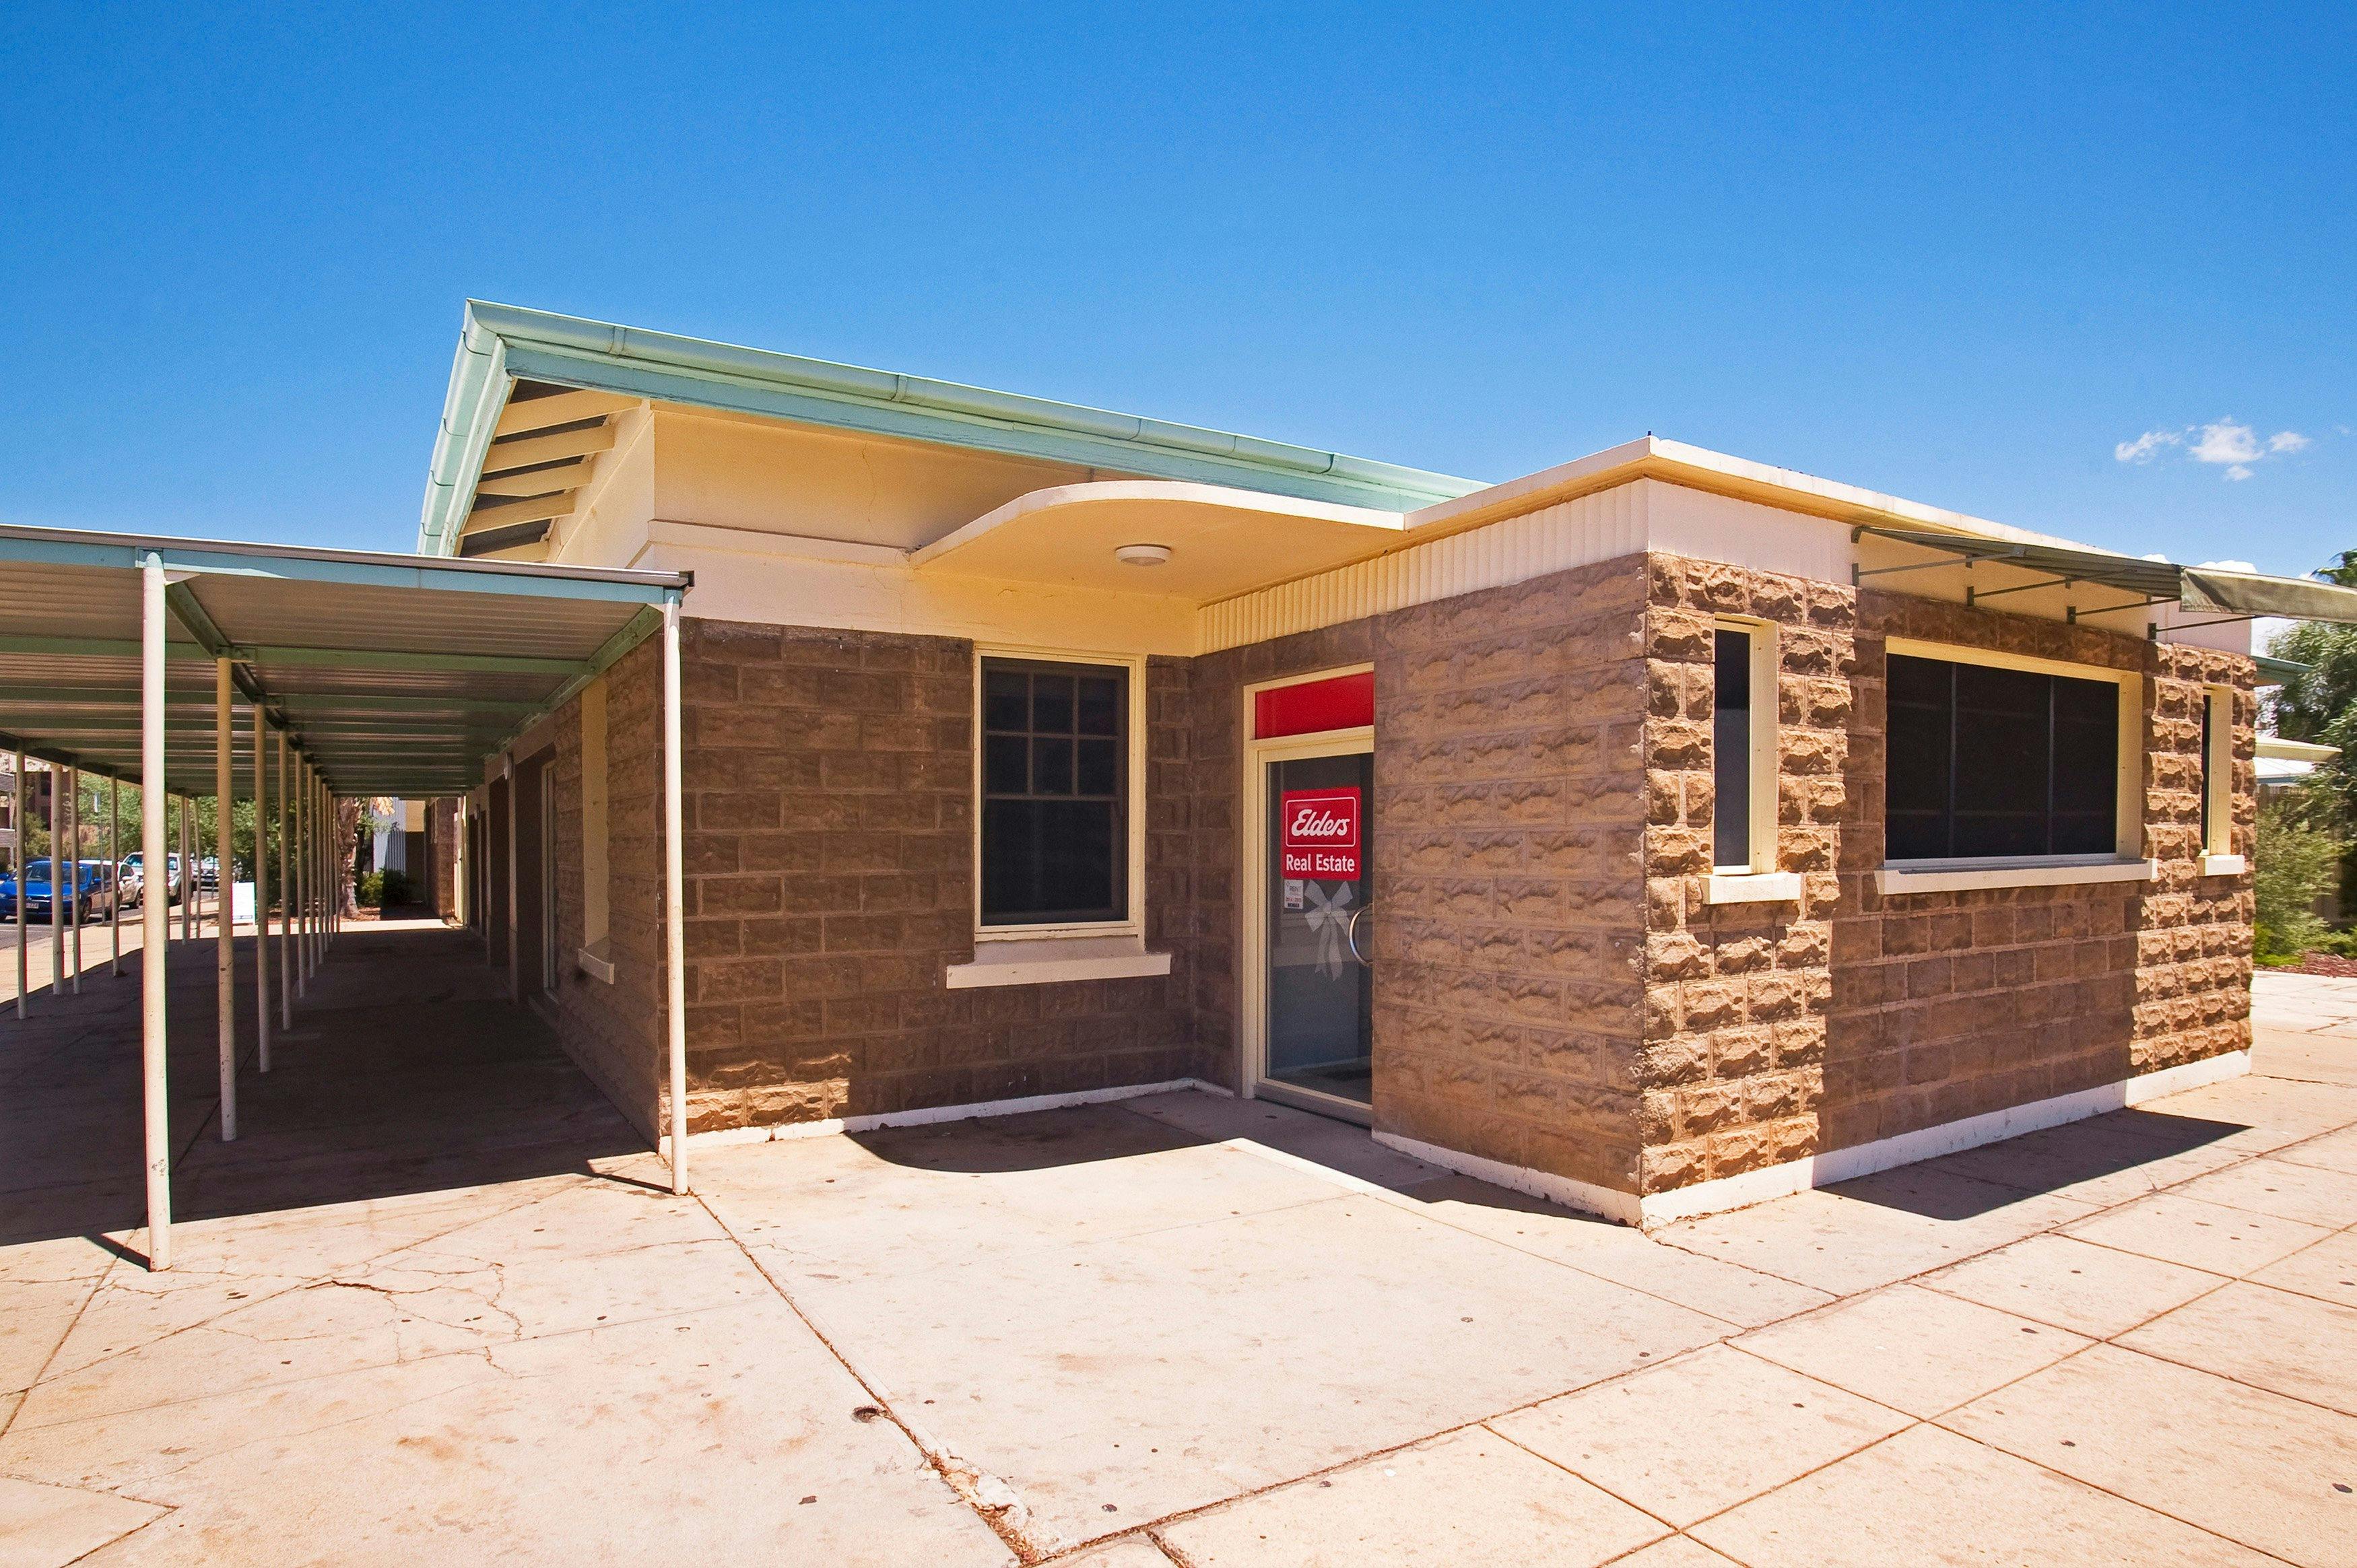 Former Alice Springs Telegraph Repeater Station and Post Office.